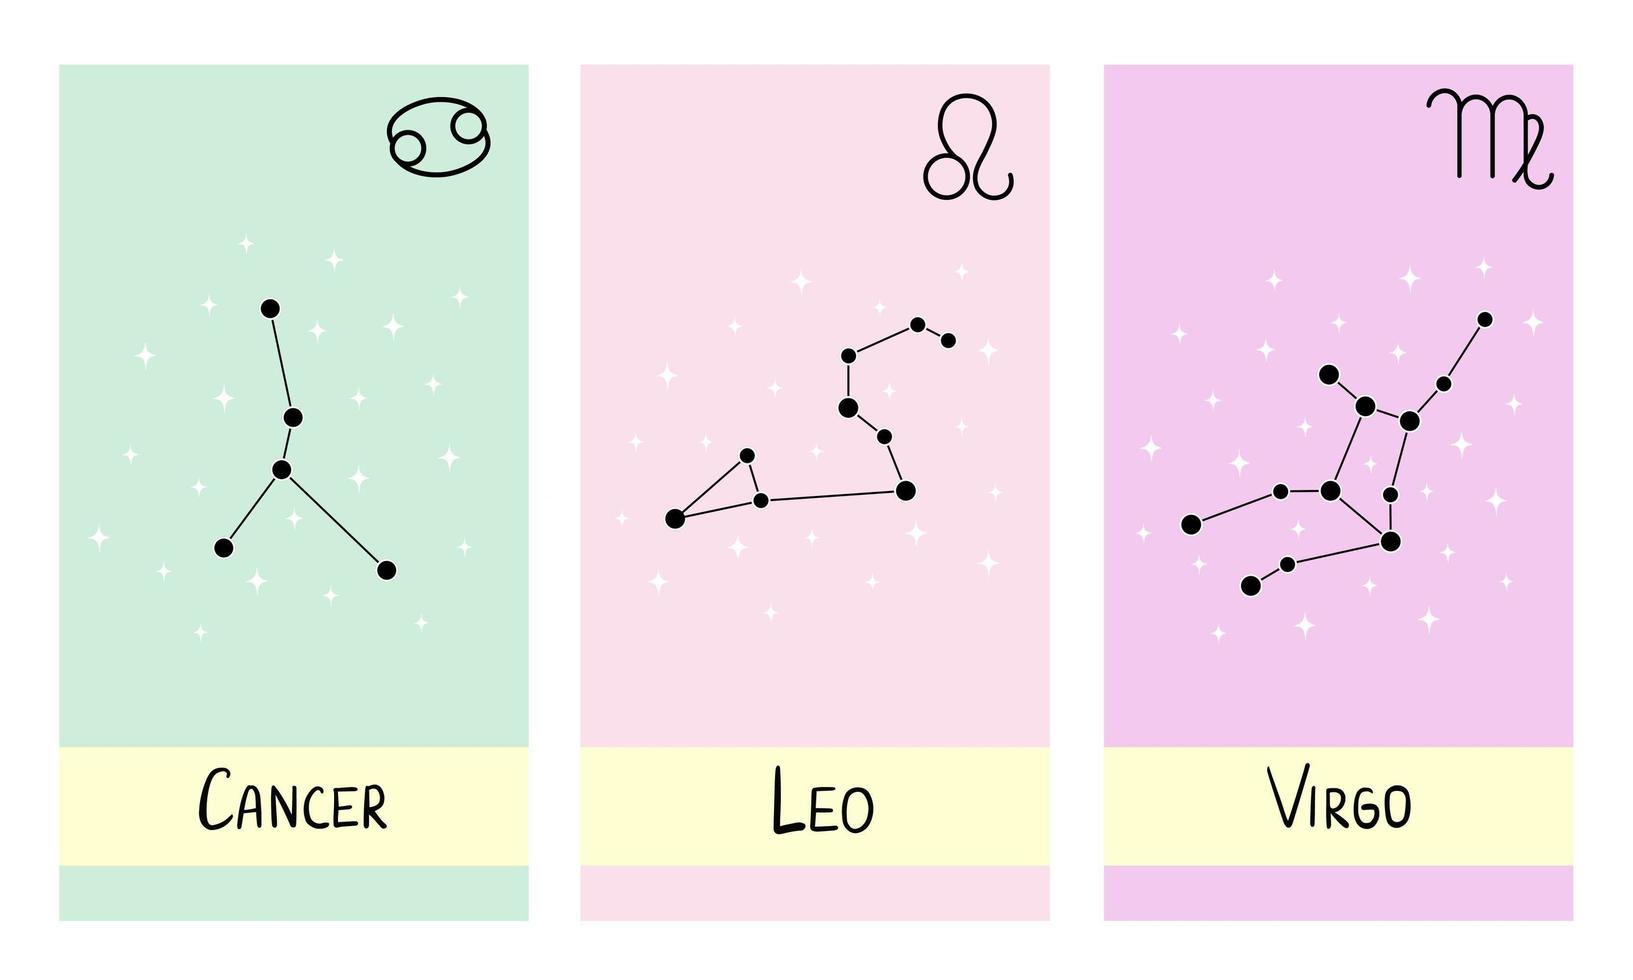 Star constellation zodiac cancer, leo, virgo. Illustration for printing, backgrounds, wallpapers, covers, packaging, greeting cards, posters, stickers, textile and seasonal design. vector